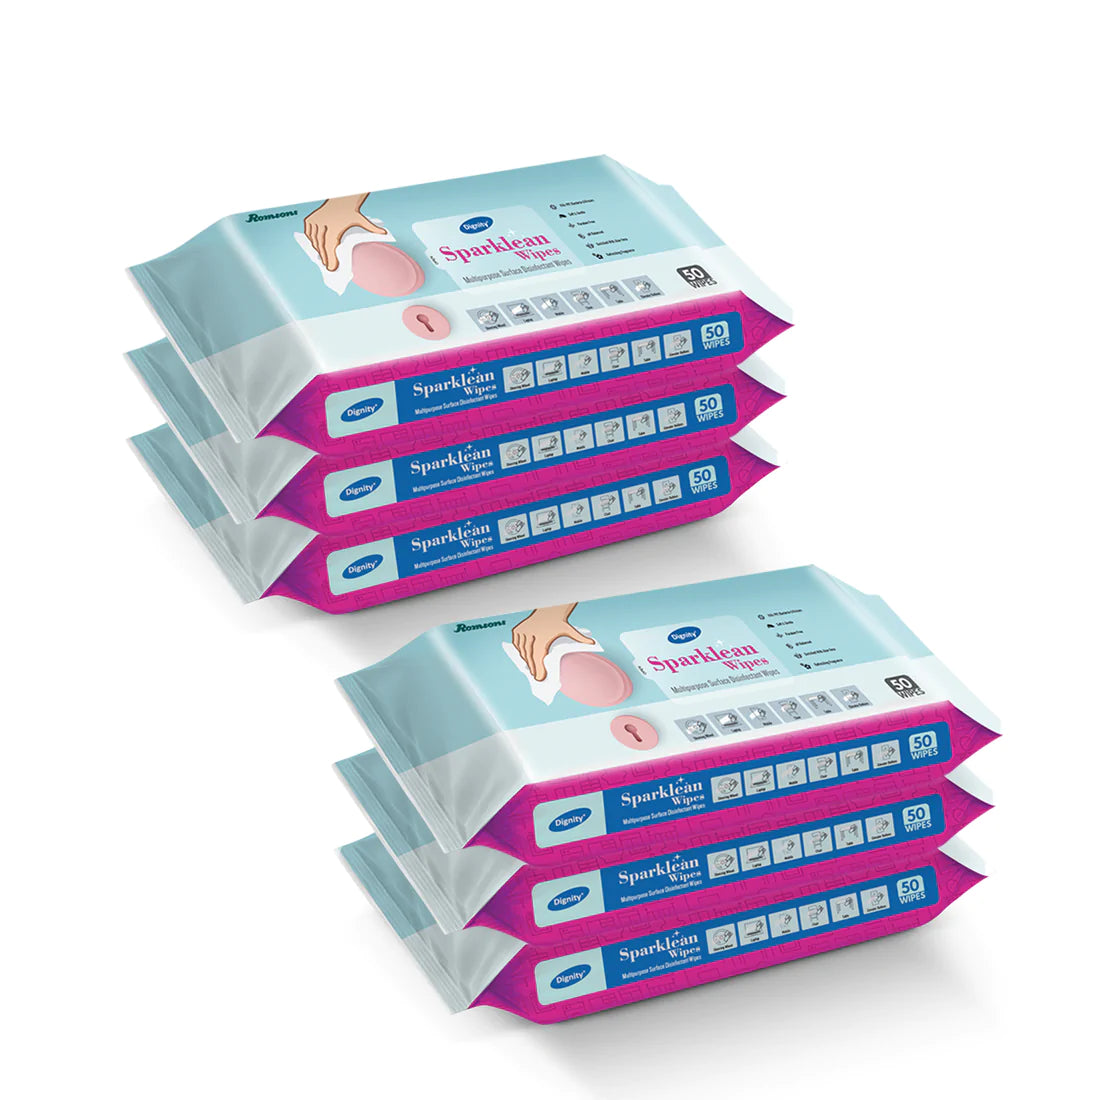 Dignity Sparklean Multipurpose Surface Cleansing Wipes (50 Wipes/Pack)